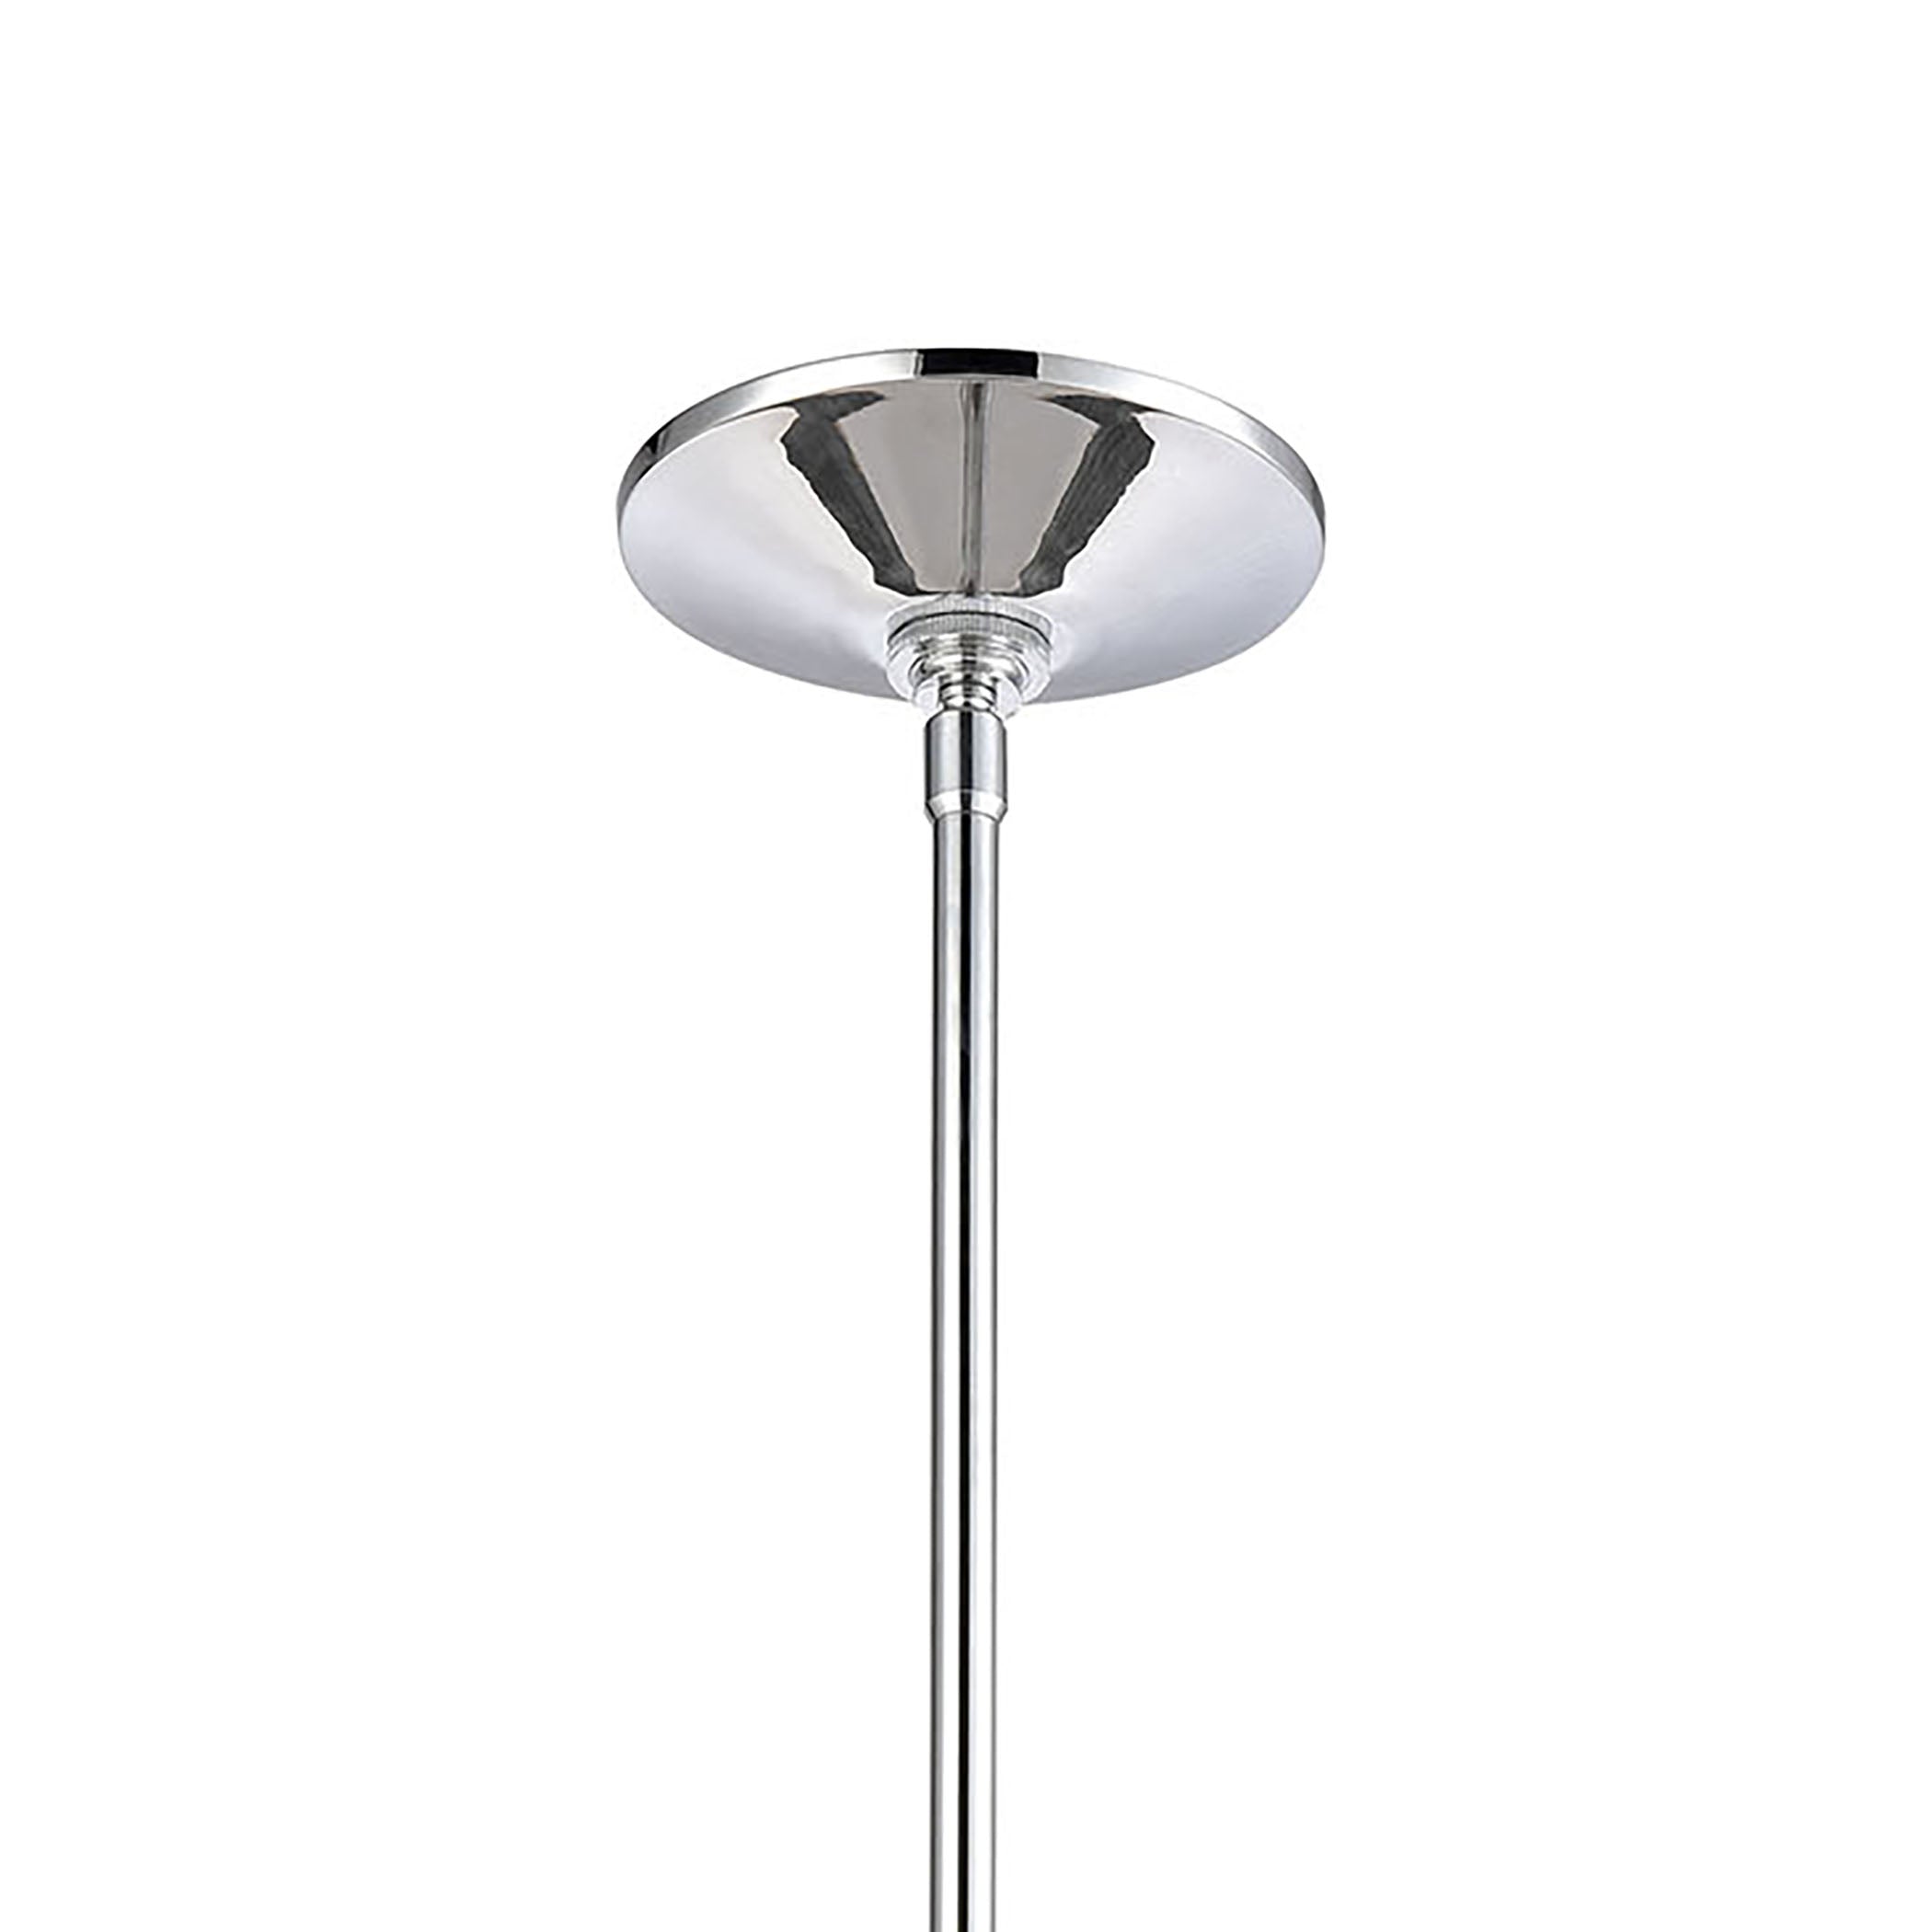 ELK Lighting 46463/1 Modley 1-Light Mini Pendant in Polished Chrome with Clear Glass